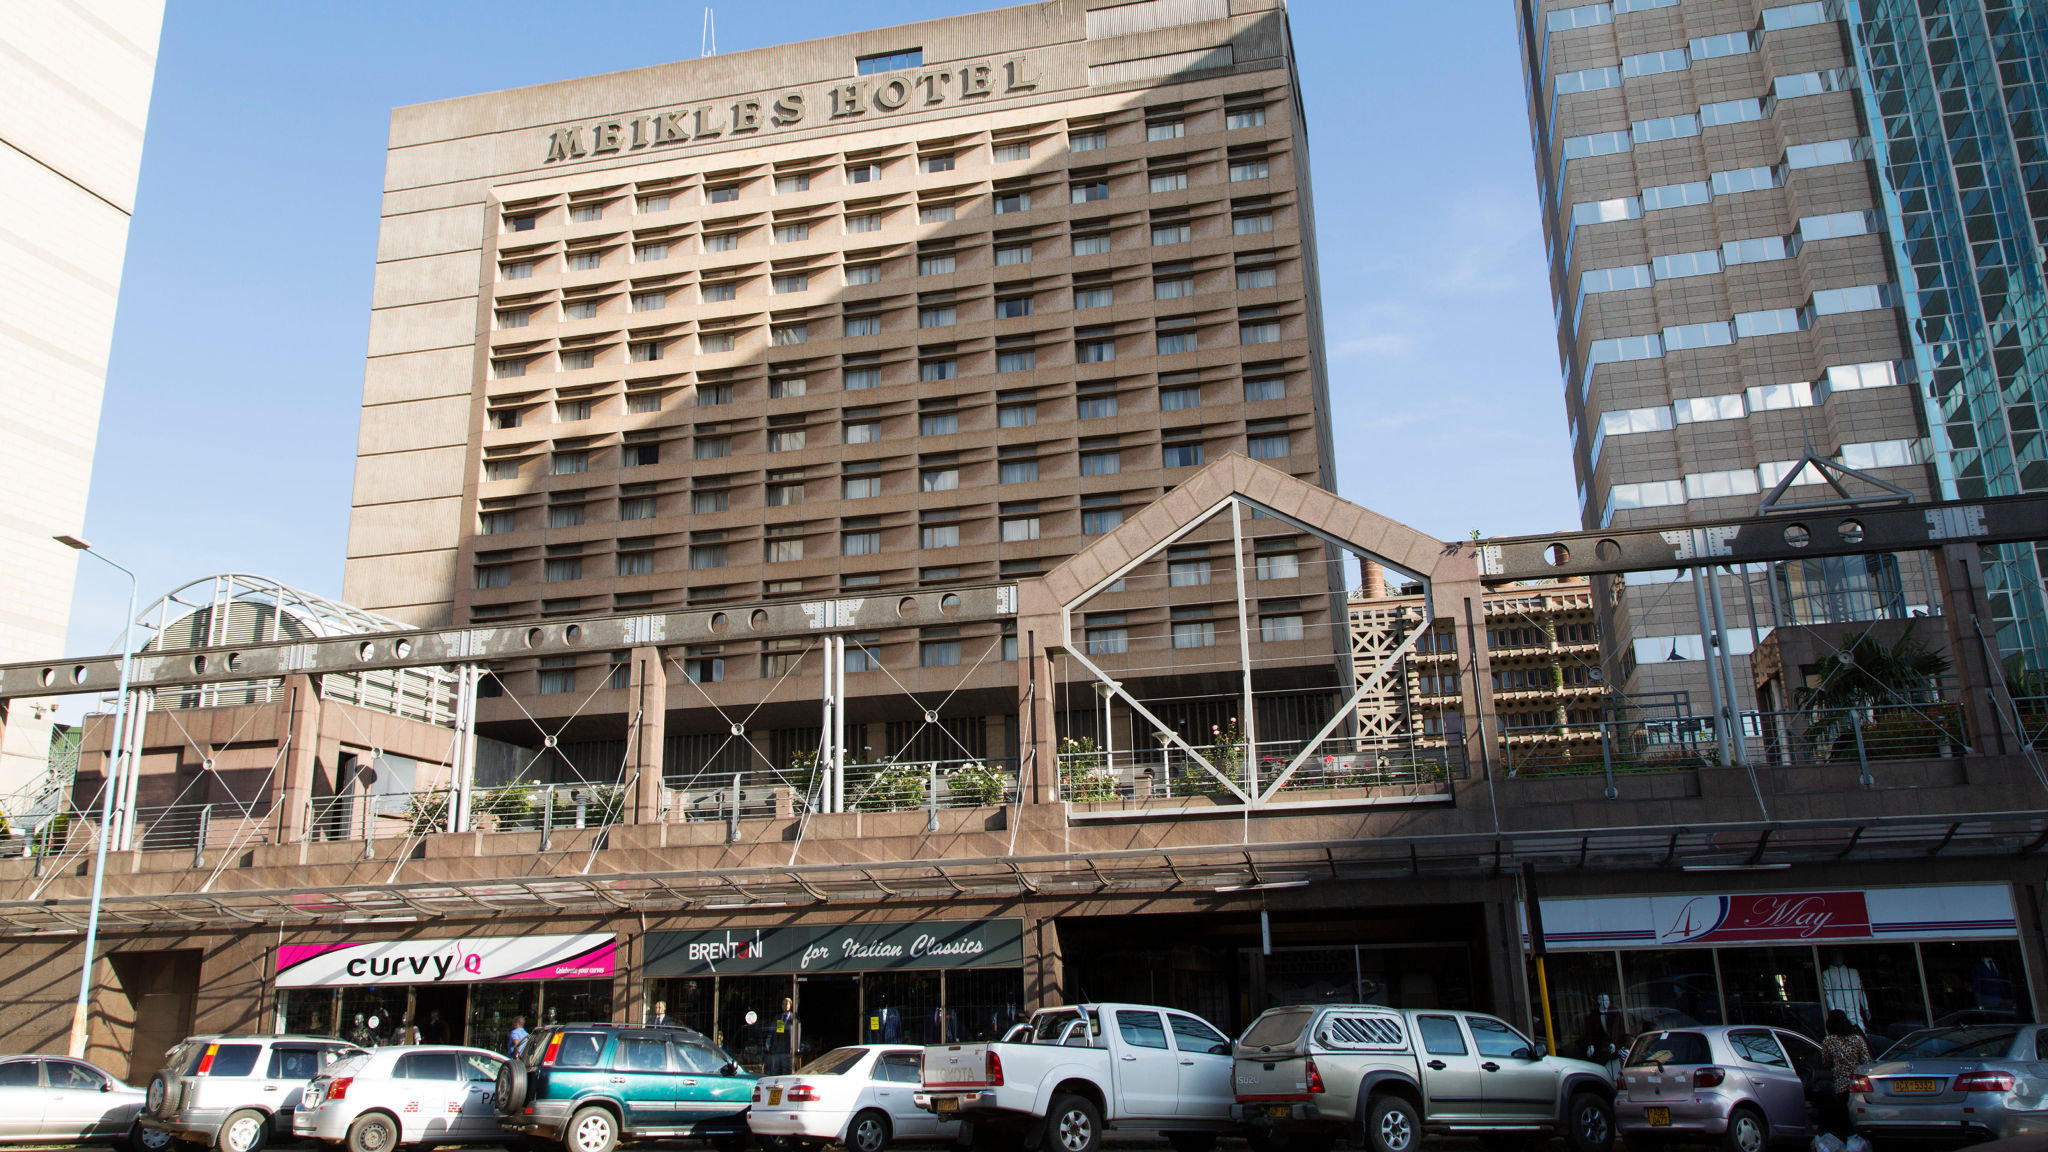 Not Hot Water At Meikles: Zimbabwe's Premier Luxury Hotel Using Buckets